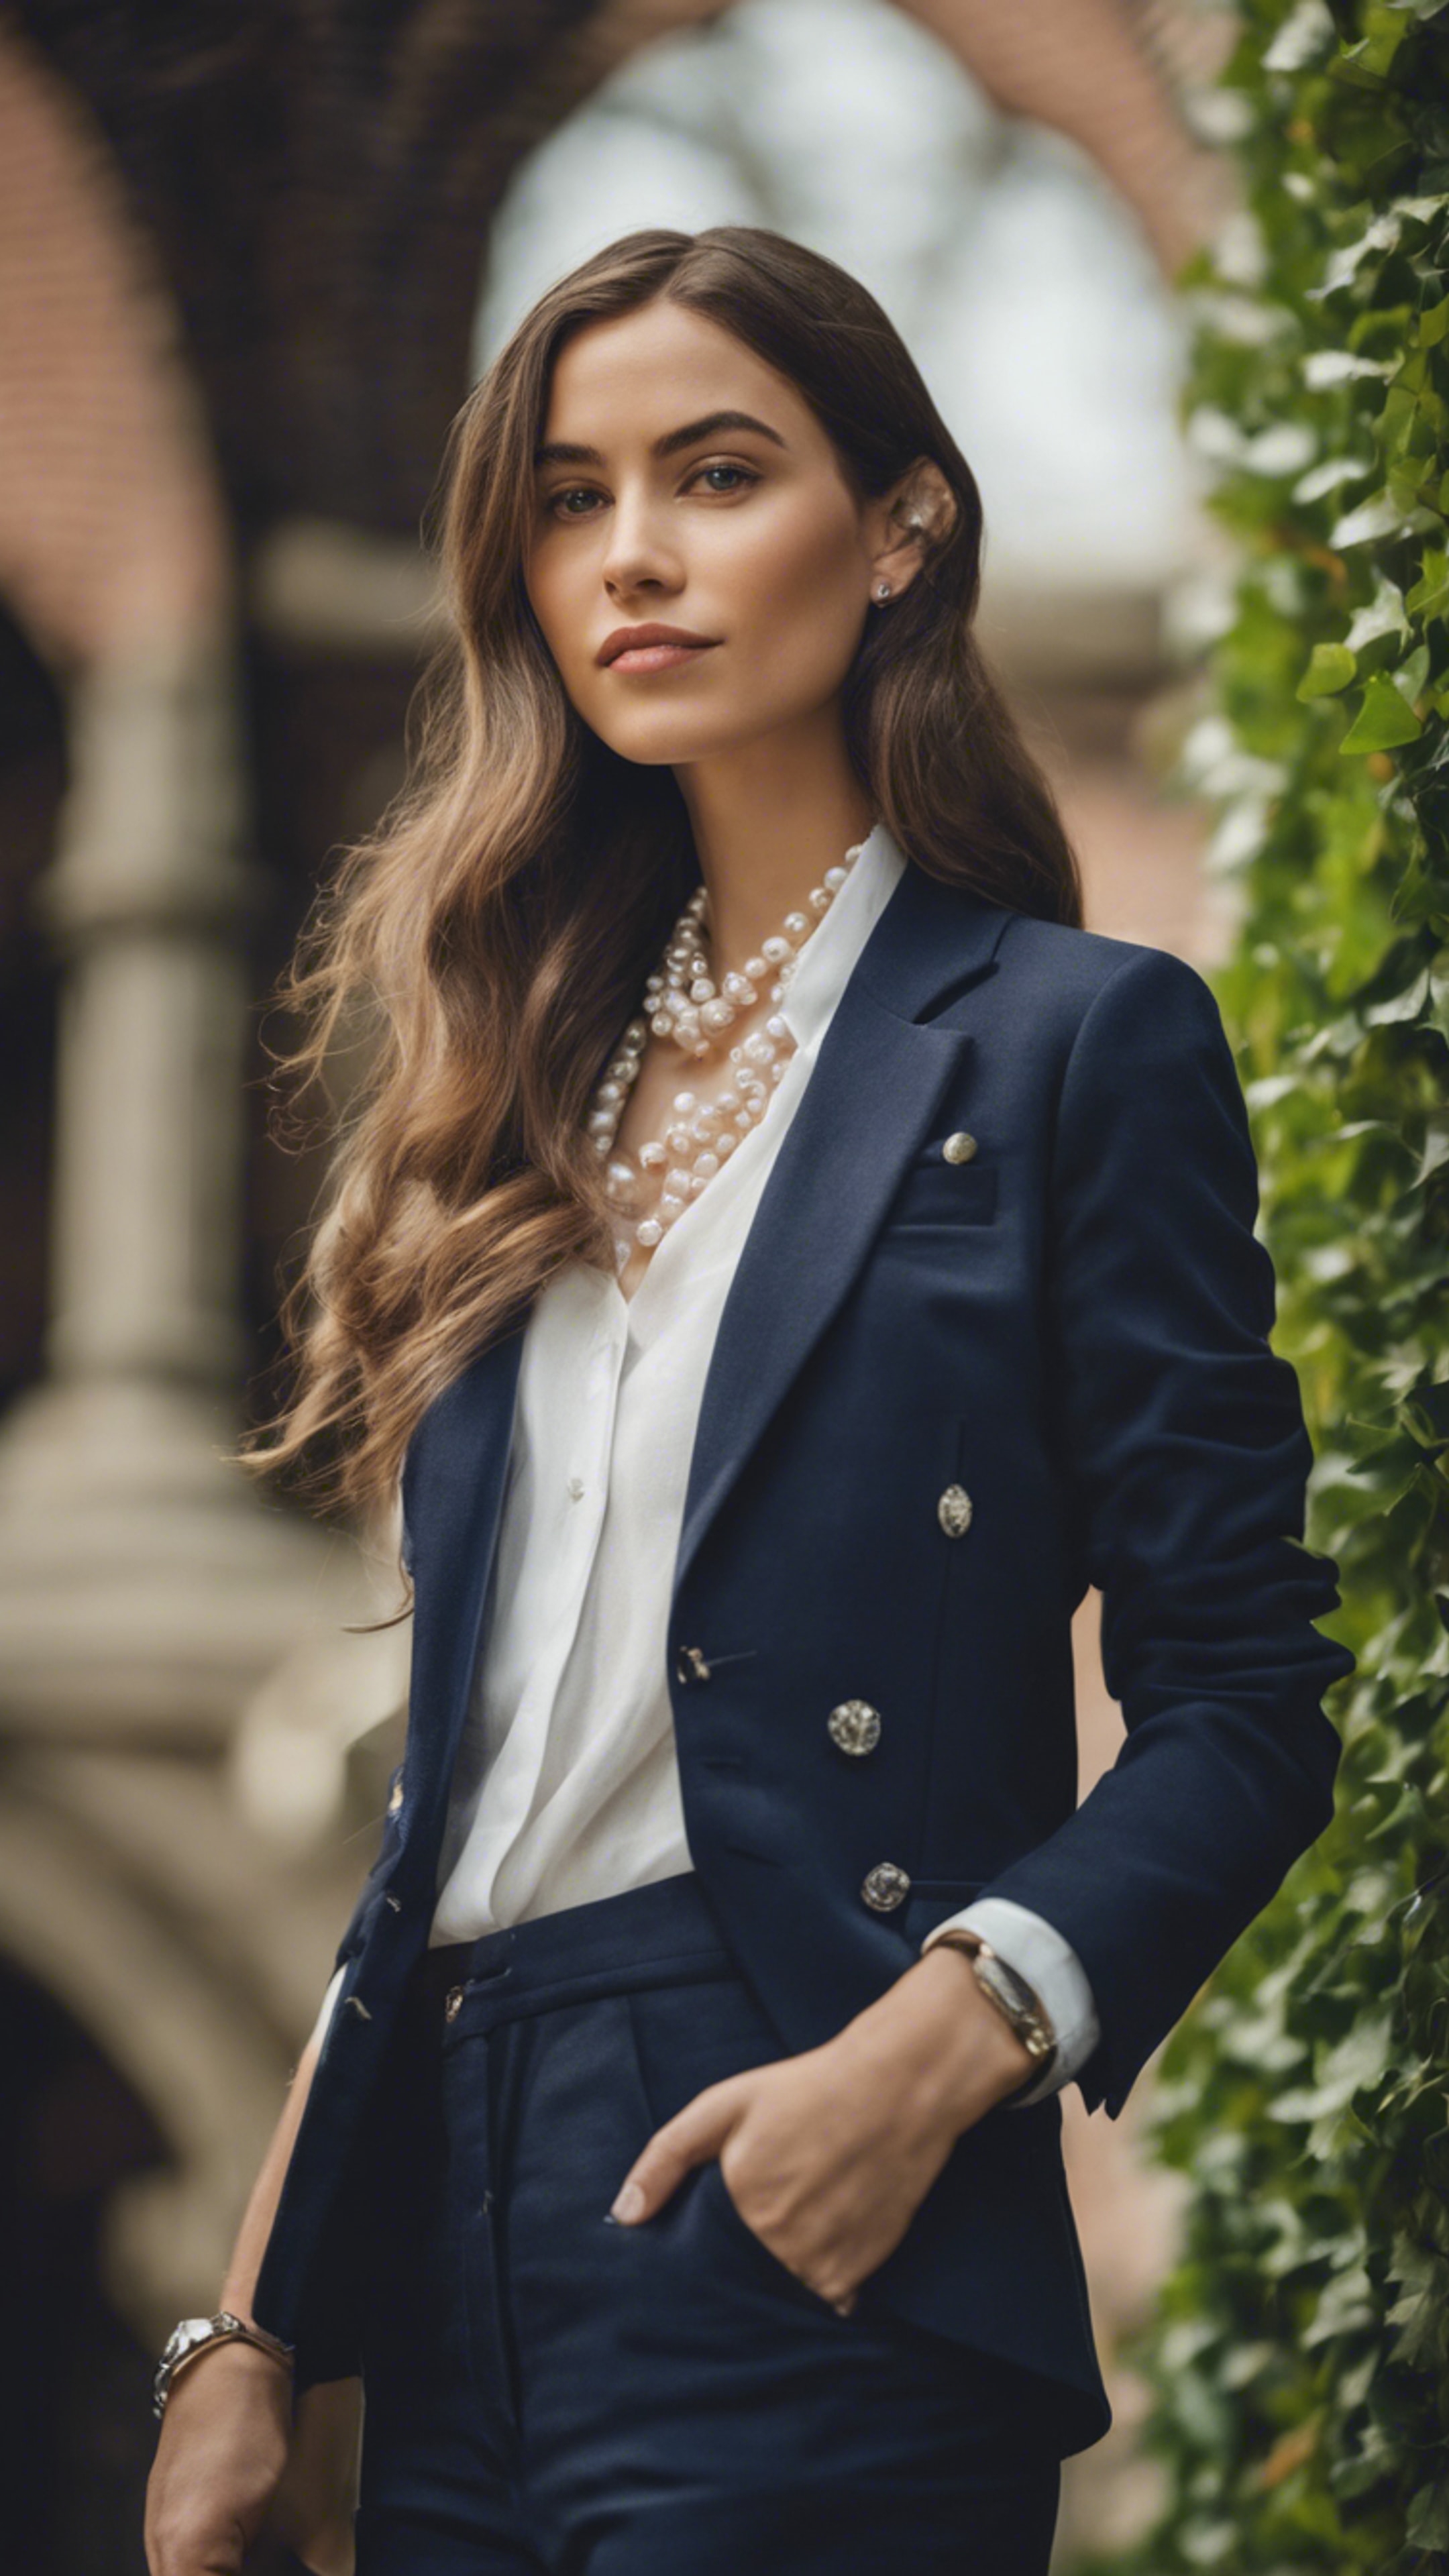 A portrait of a preppy woman in a navy blue blazer, pearl necklace, and a white linen shirt, posing in an Ivy League campus. Tapeta[1775f808339c45cb81cf]